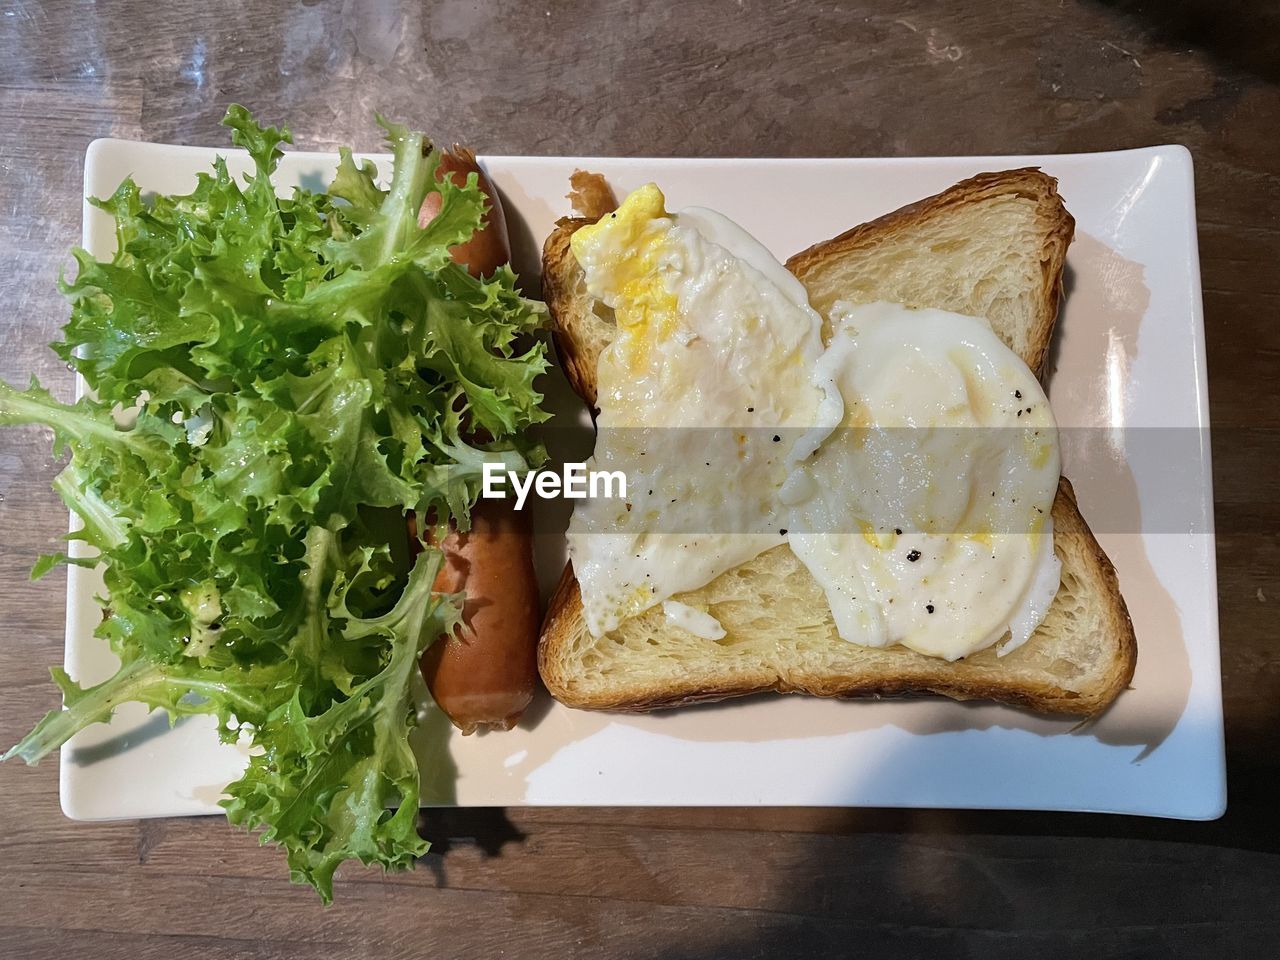 food and drink, food, healthy eating, freshness, wellbeing, fast food, vegetable, dish, indoors, high angle view, lunch, table, meal, bread, still life, no people, plate, produce, salad, wood, serving size, directly above, breakfast, herb, arugula, close-up, cutting board, cuisine